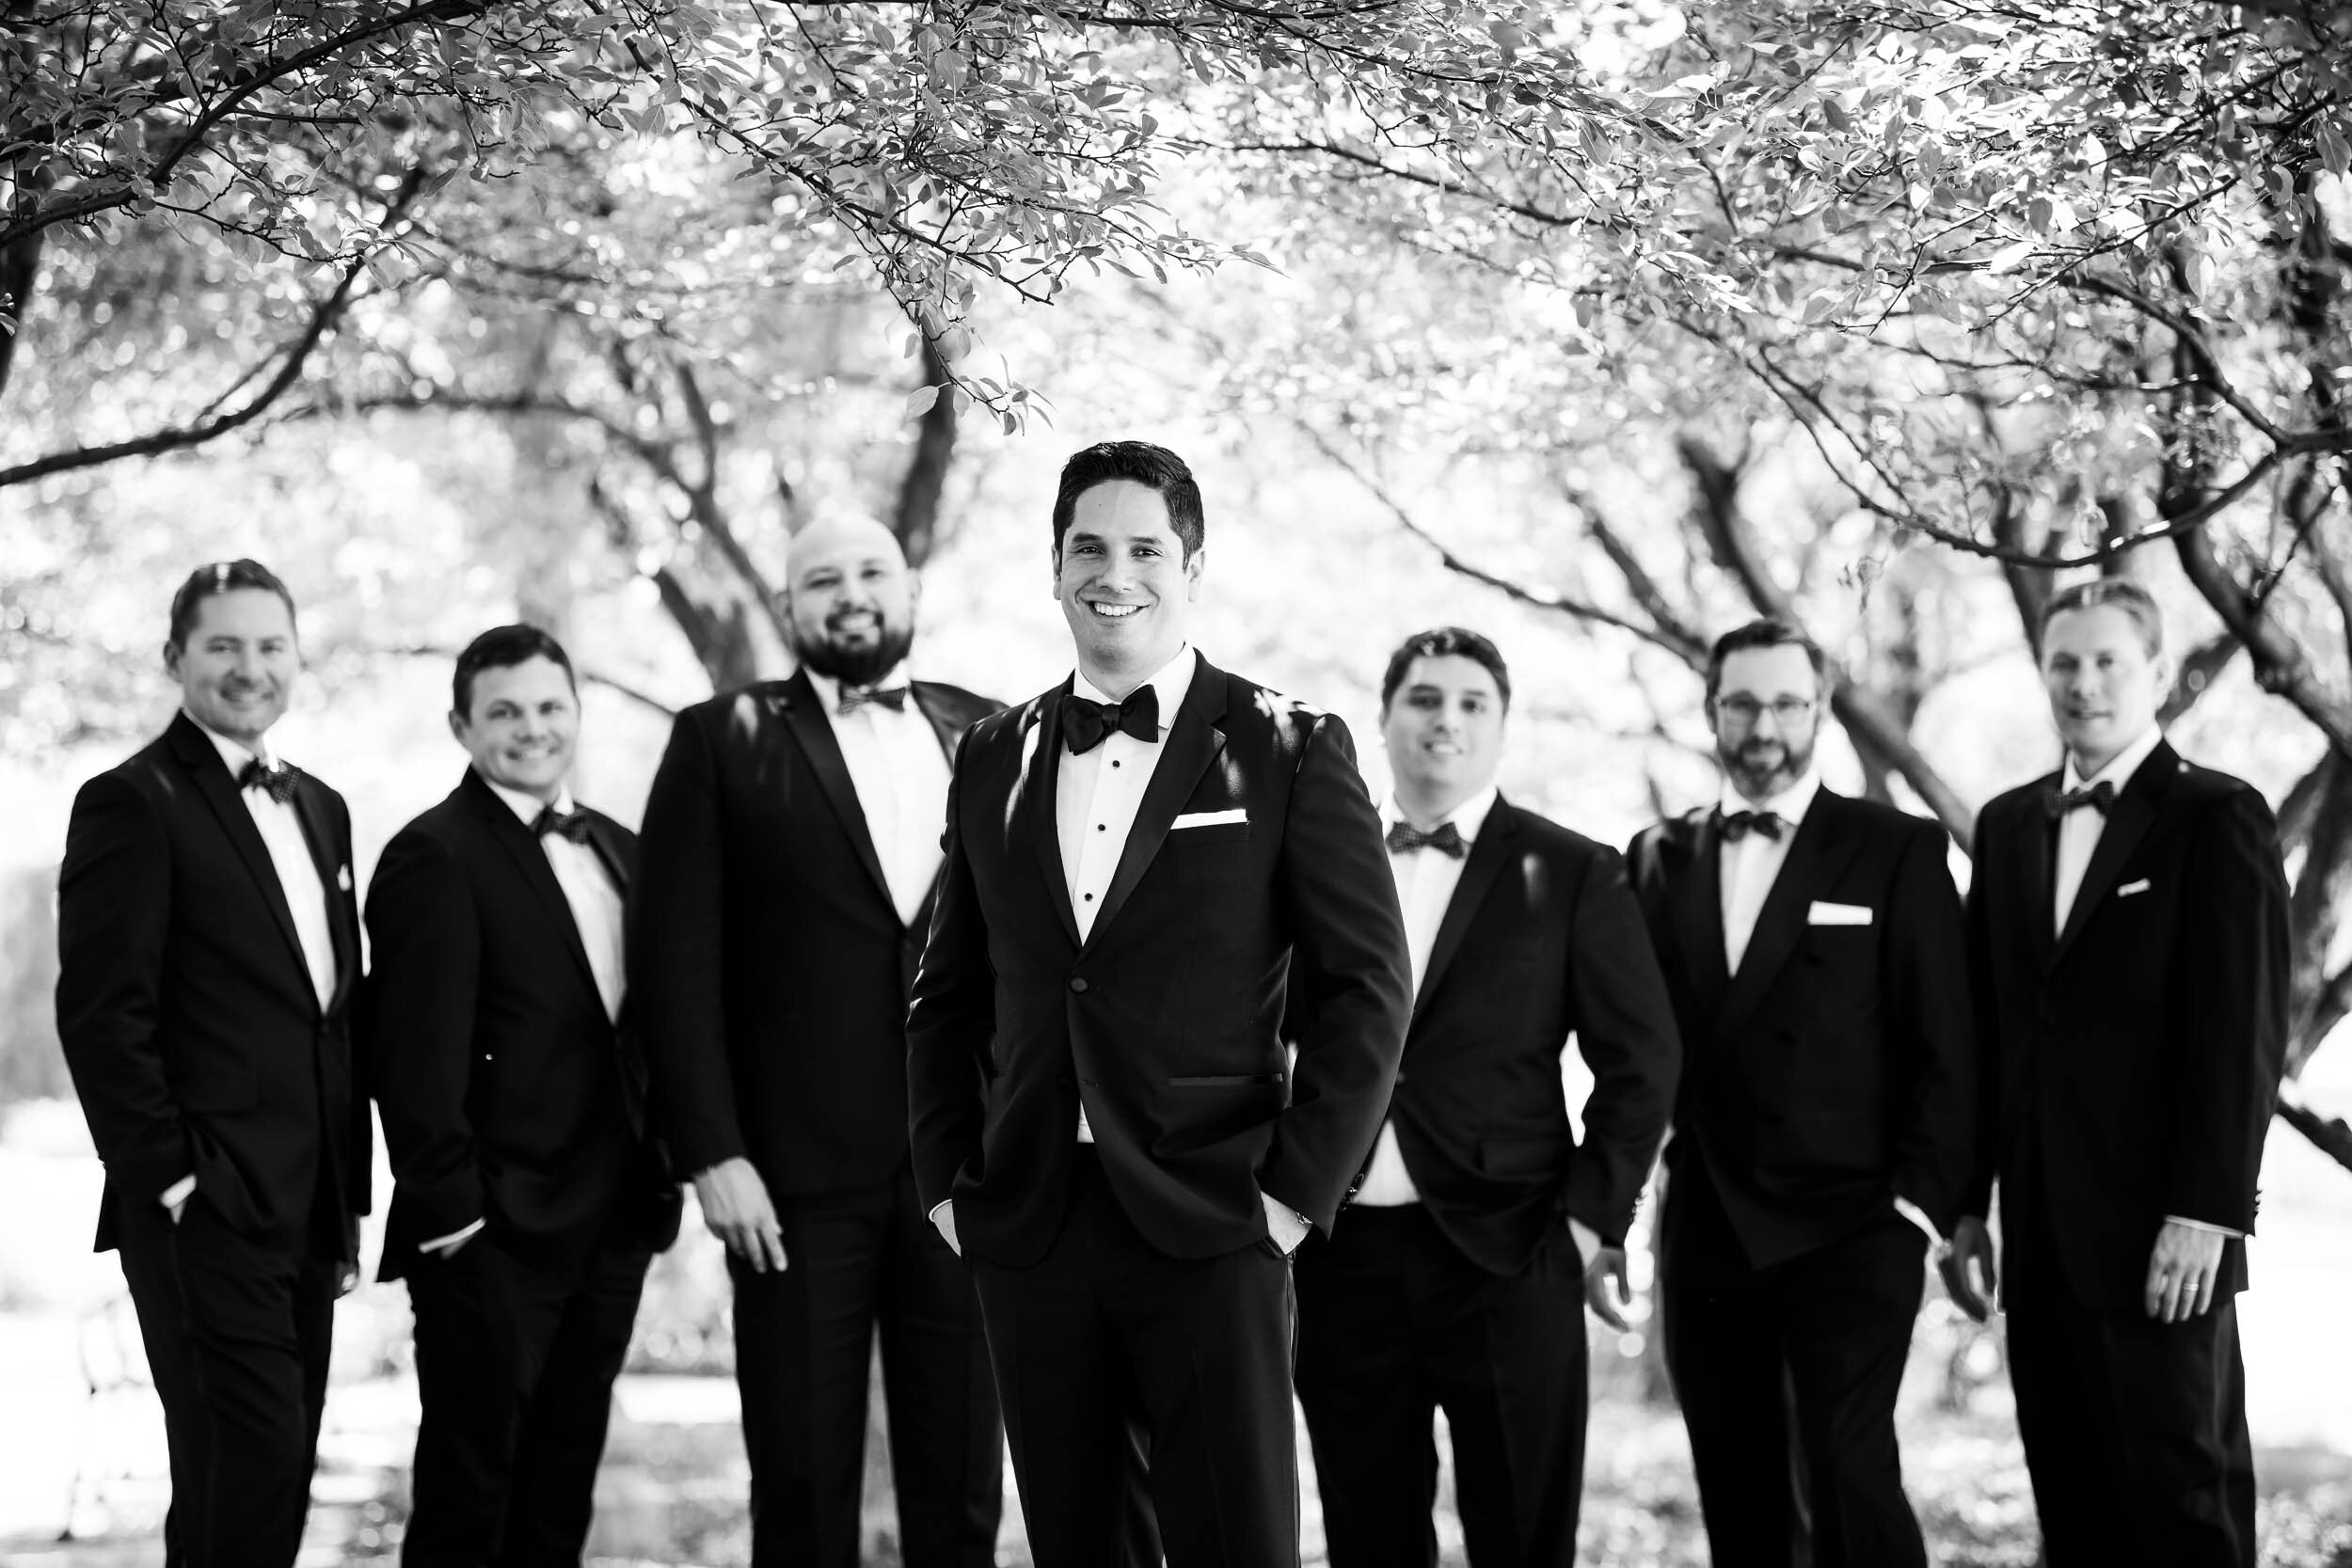 Black and white grooms and groomsmen photography: Carnivale Chicago Wedding captured by J. Brown Photography